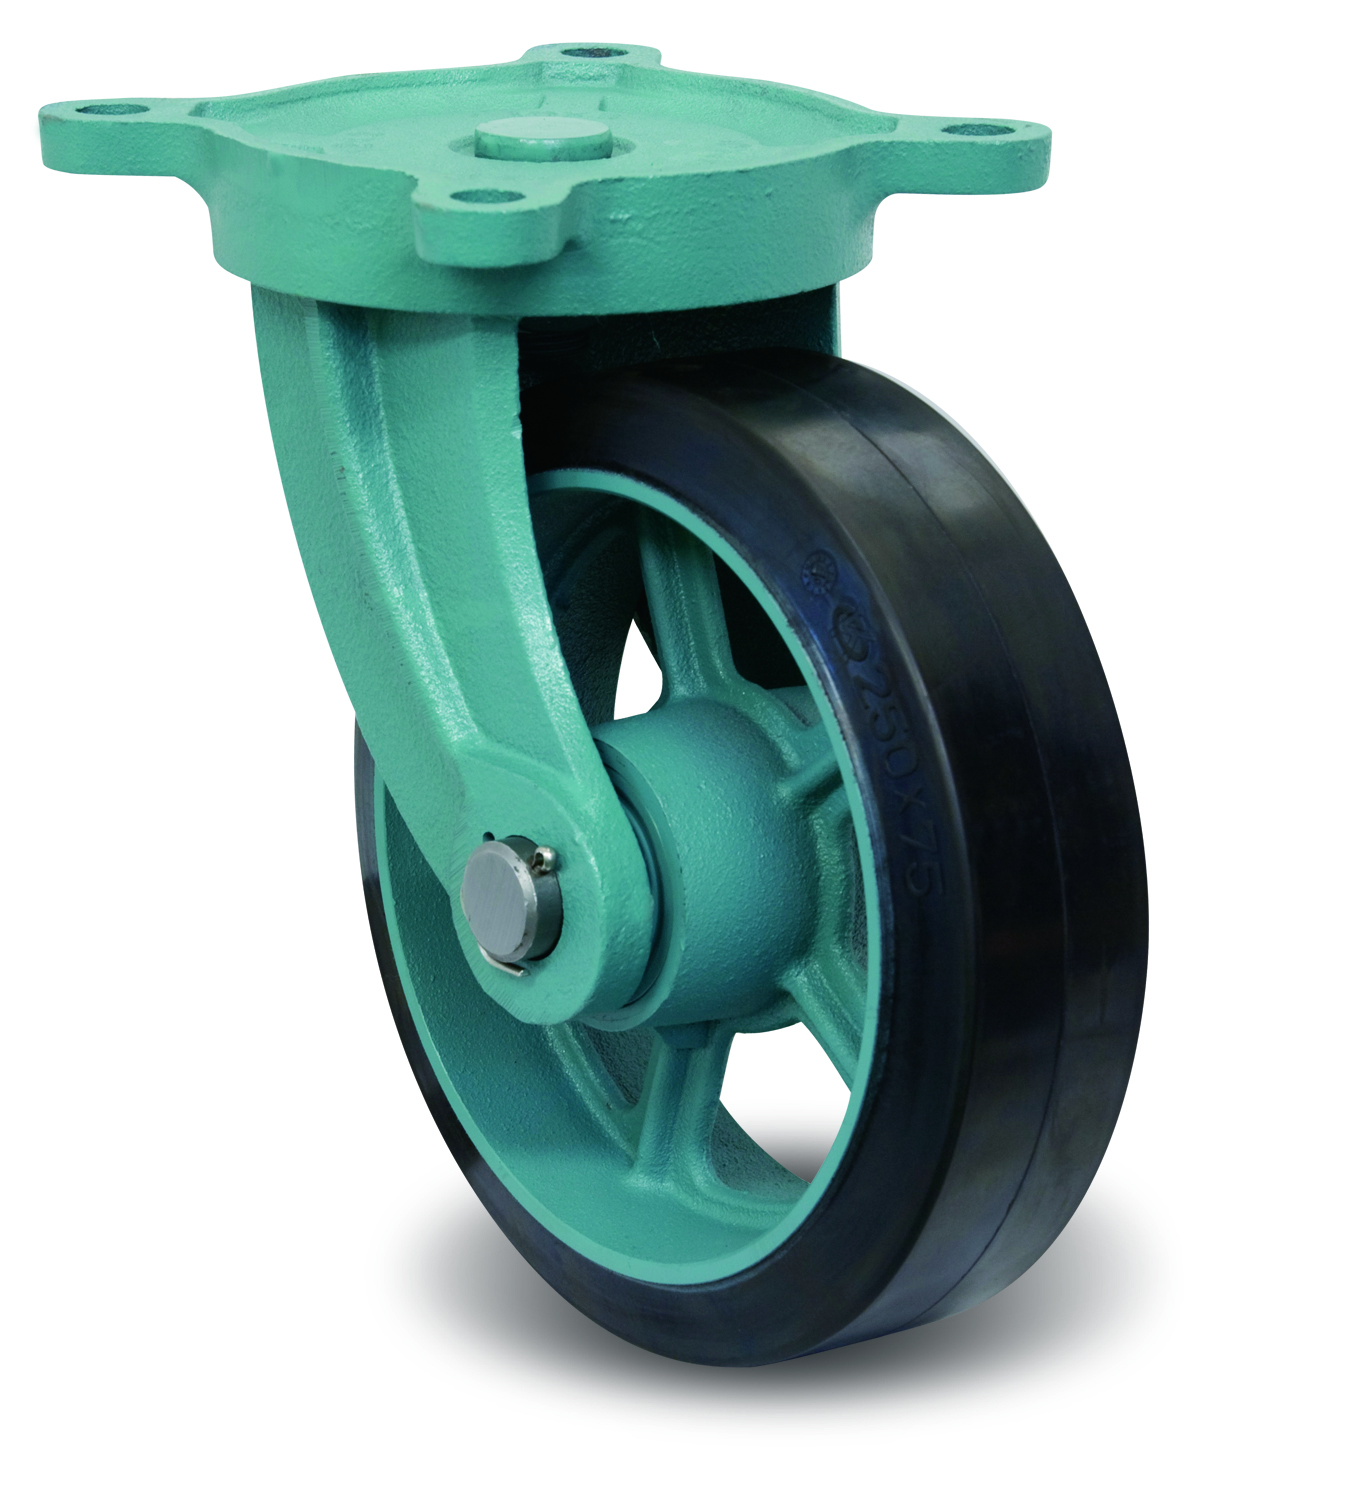 Casters - Rubber with Ductile Steel Swivel Plate, MG-O Series with Bracket, E/MG-O Series. EMG-O100X50